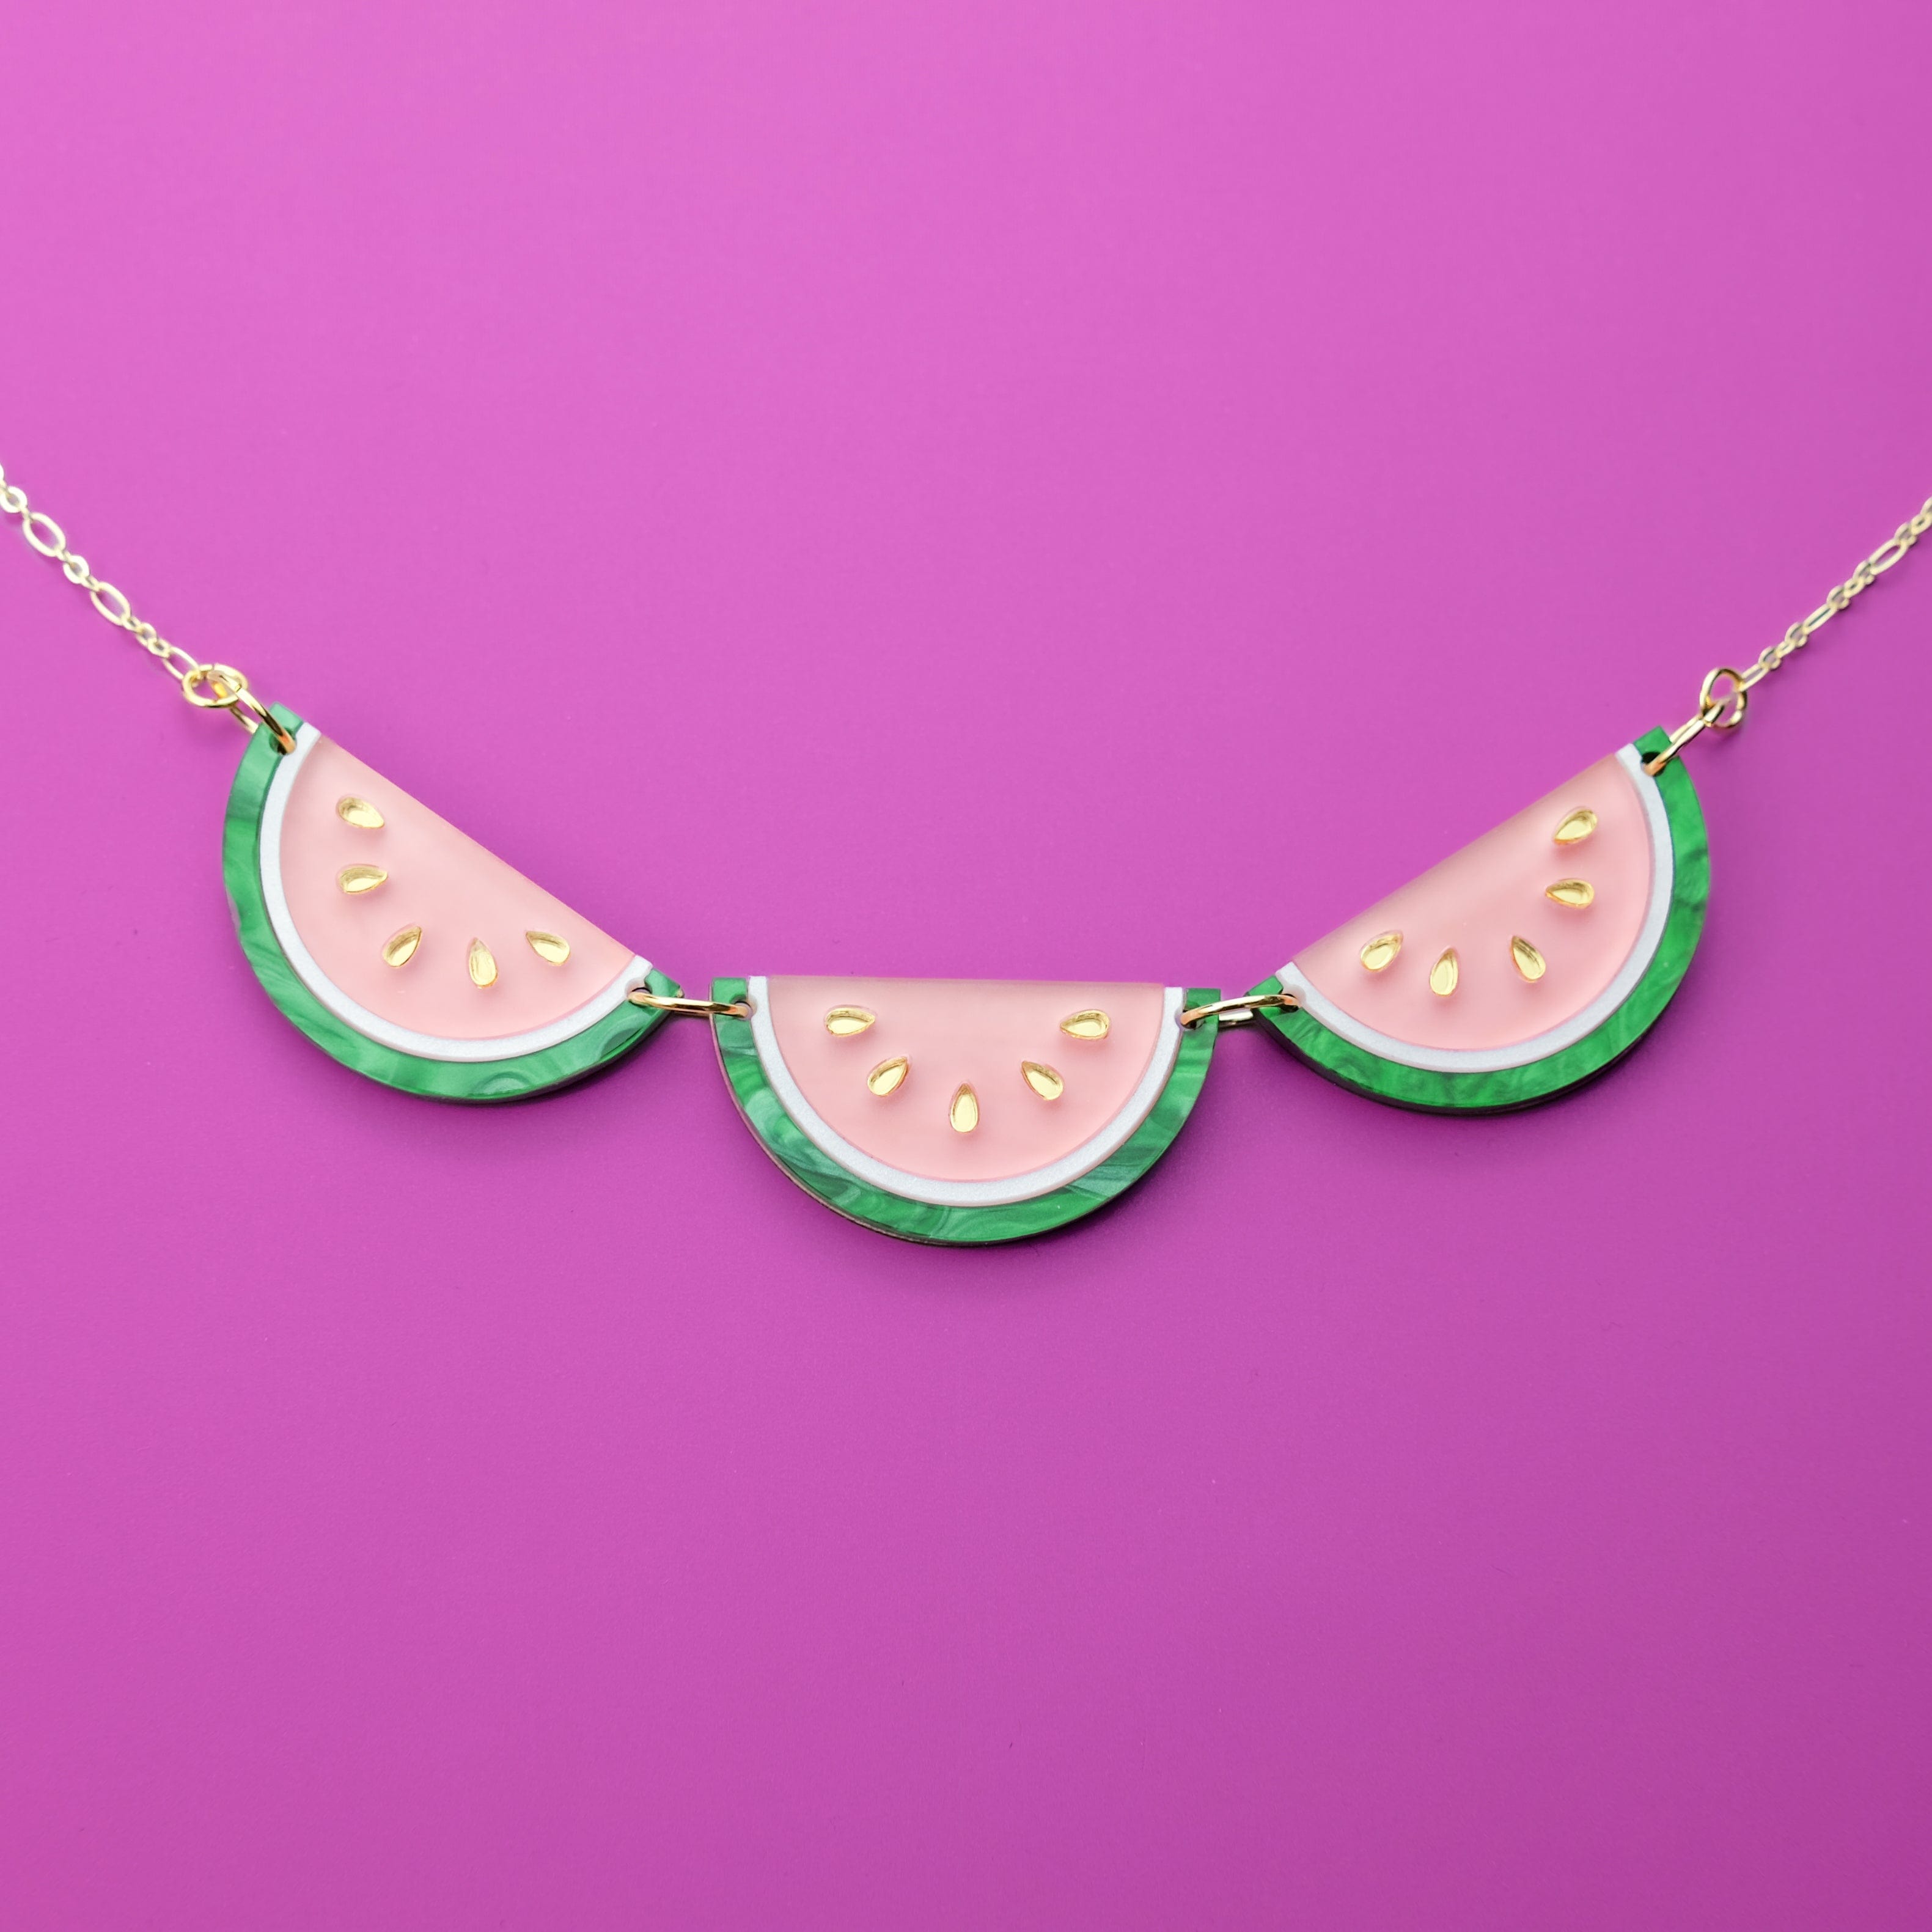 Watermelon slice necklace hand-made 